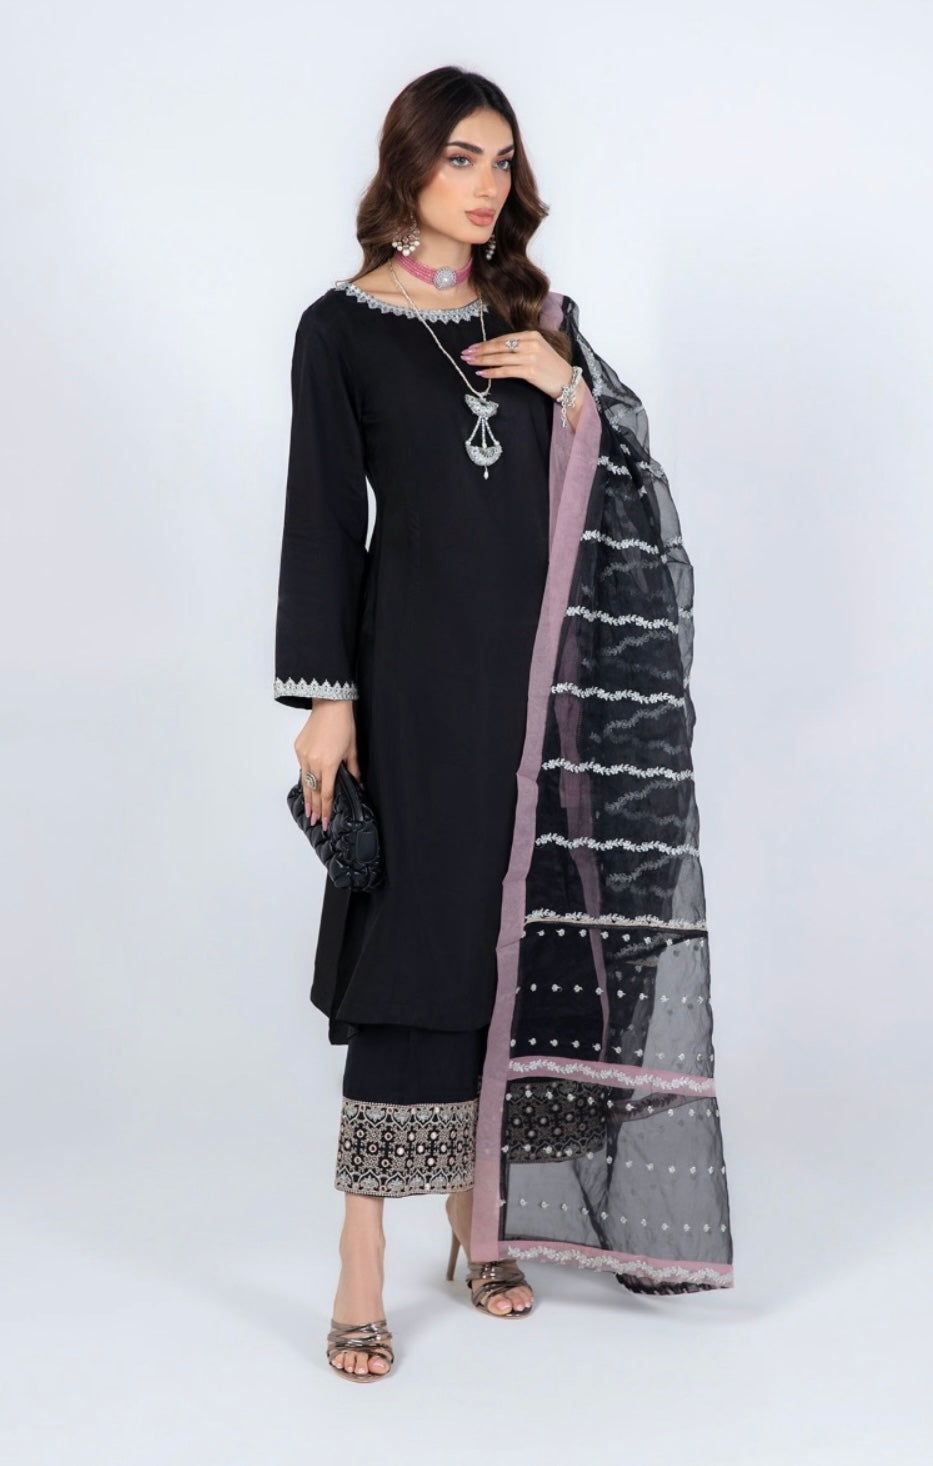 SIMRANS Ivana luxury collection 3 piece black embroidered suit mother and daughter/kids